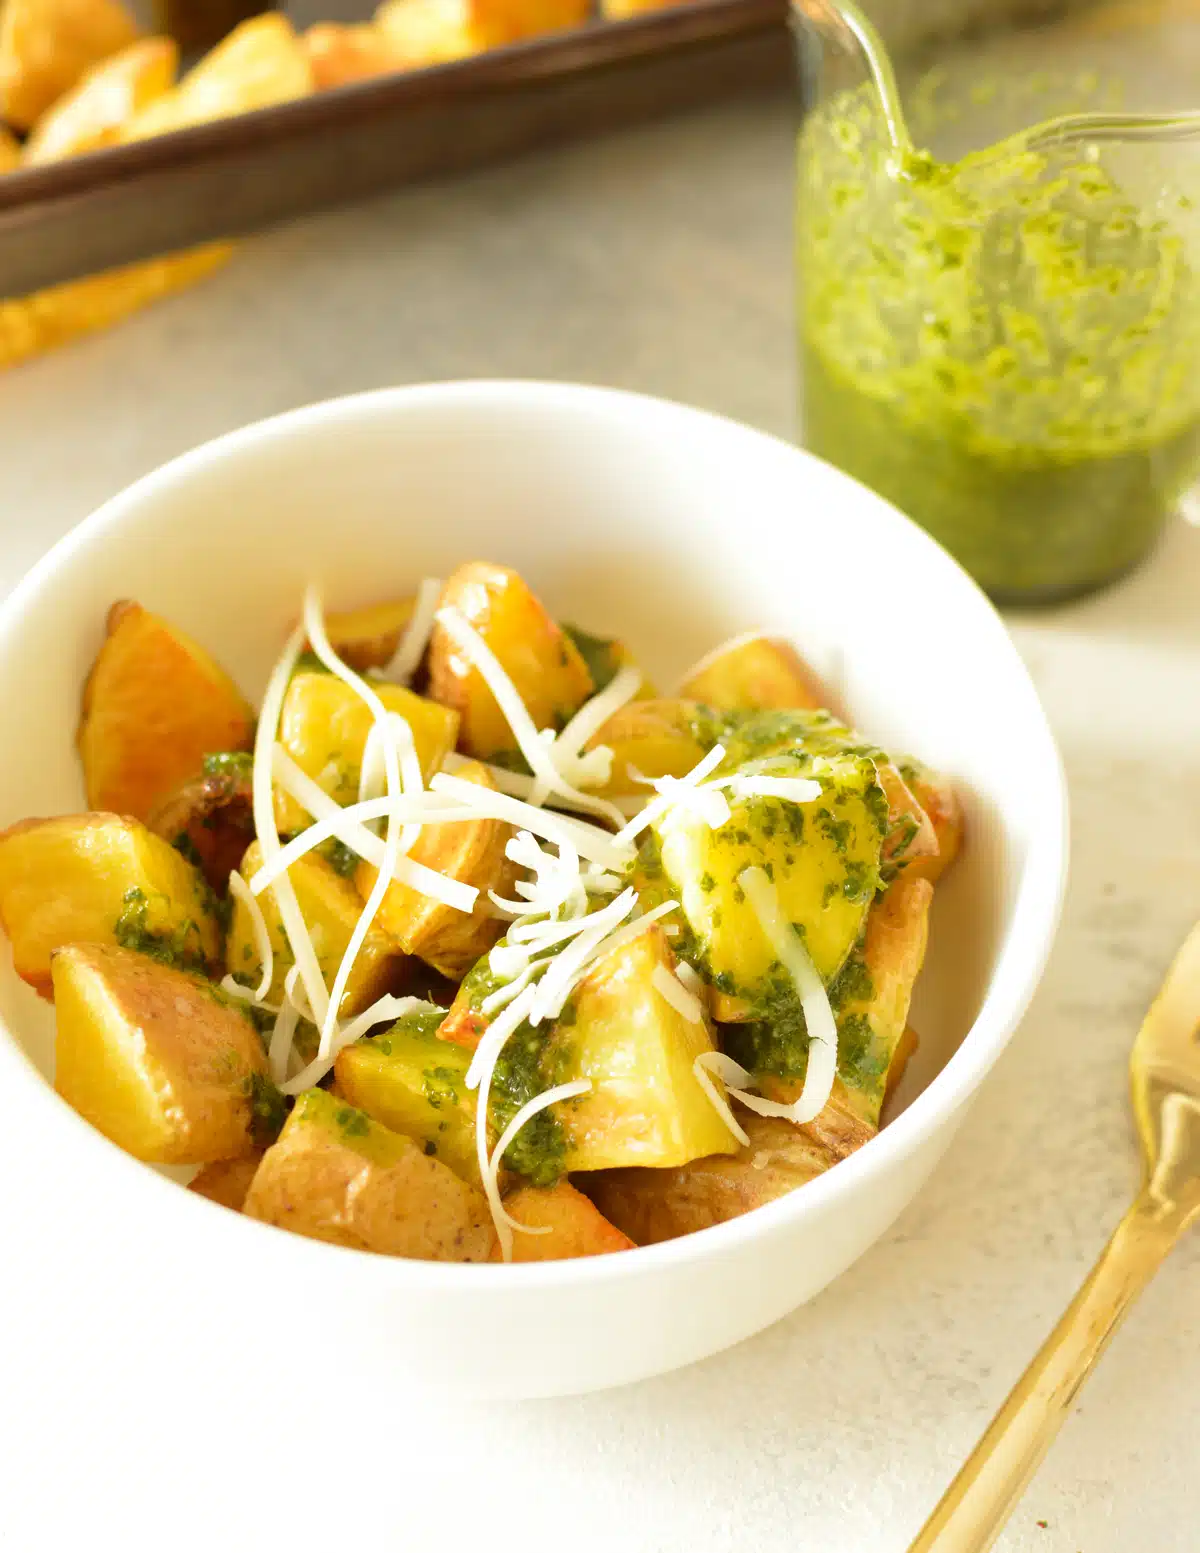 Roasted honey gold potatoes with cilantro vinaigrette. in a white bowl.